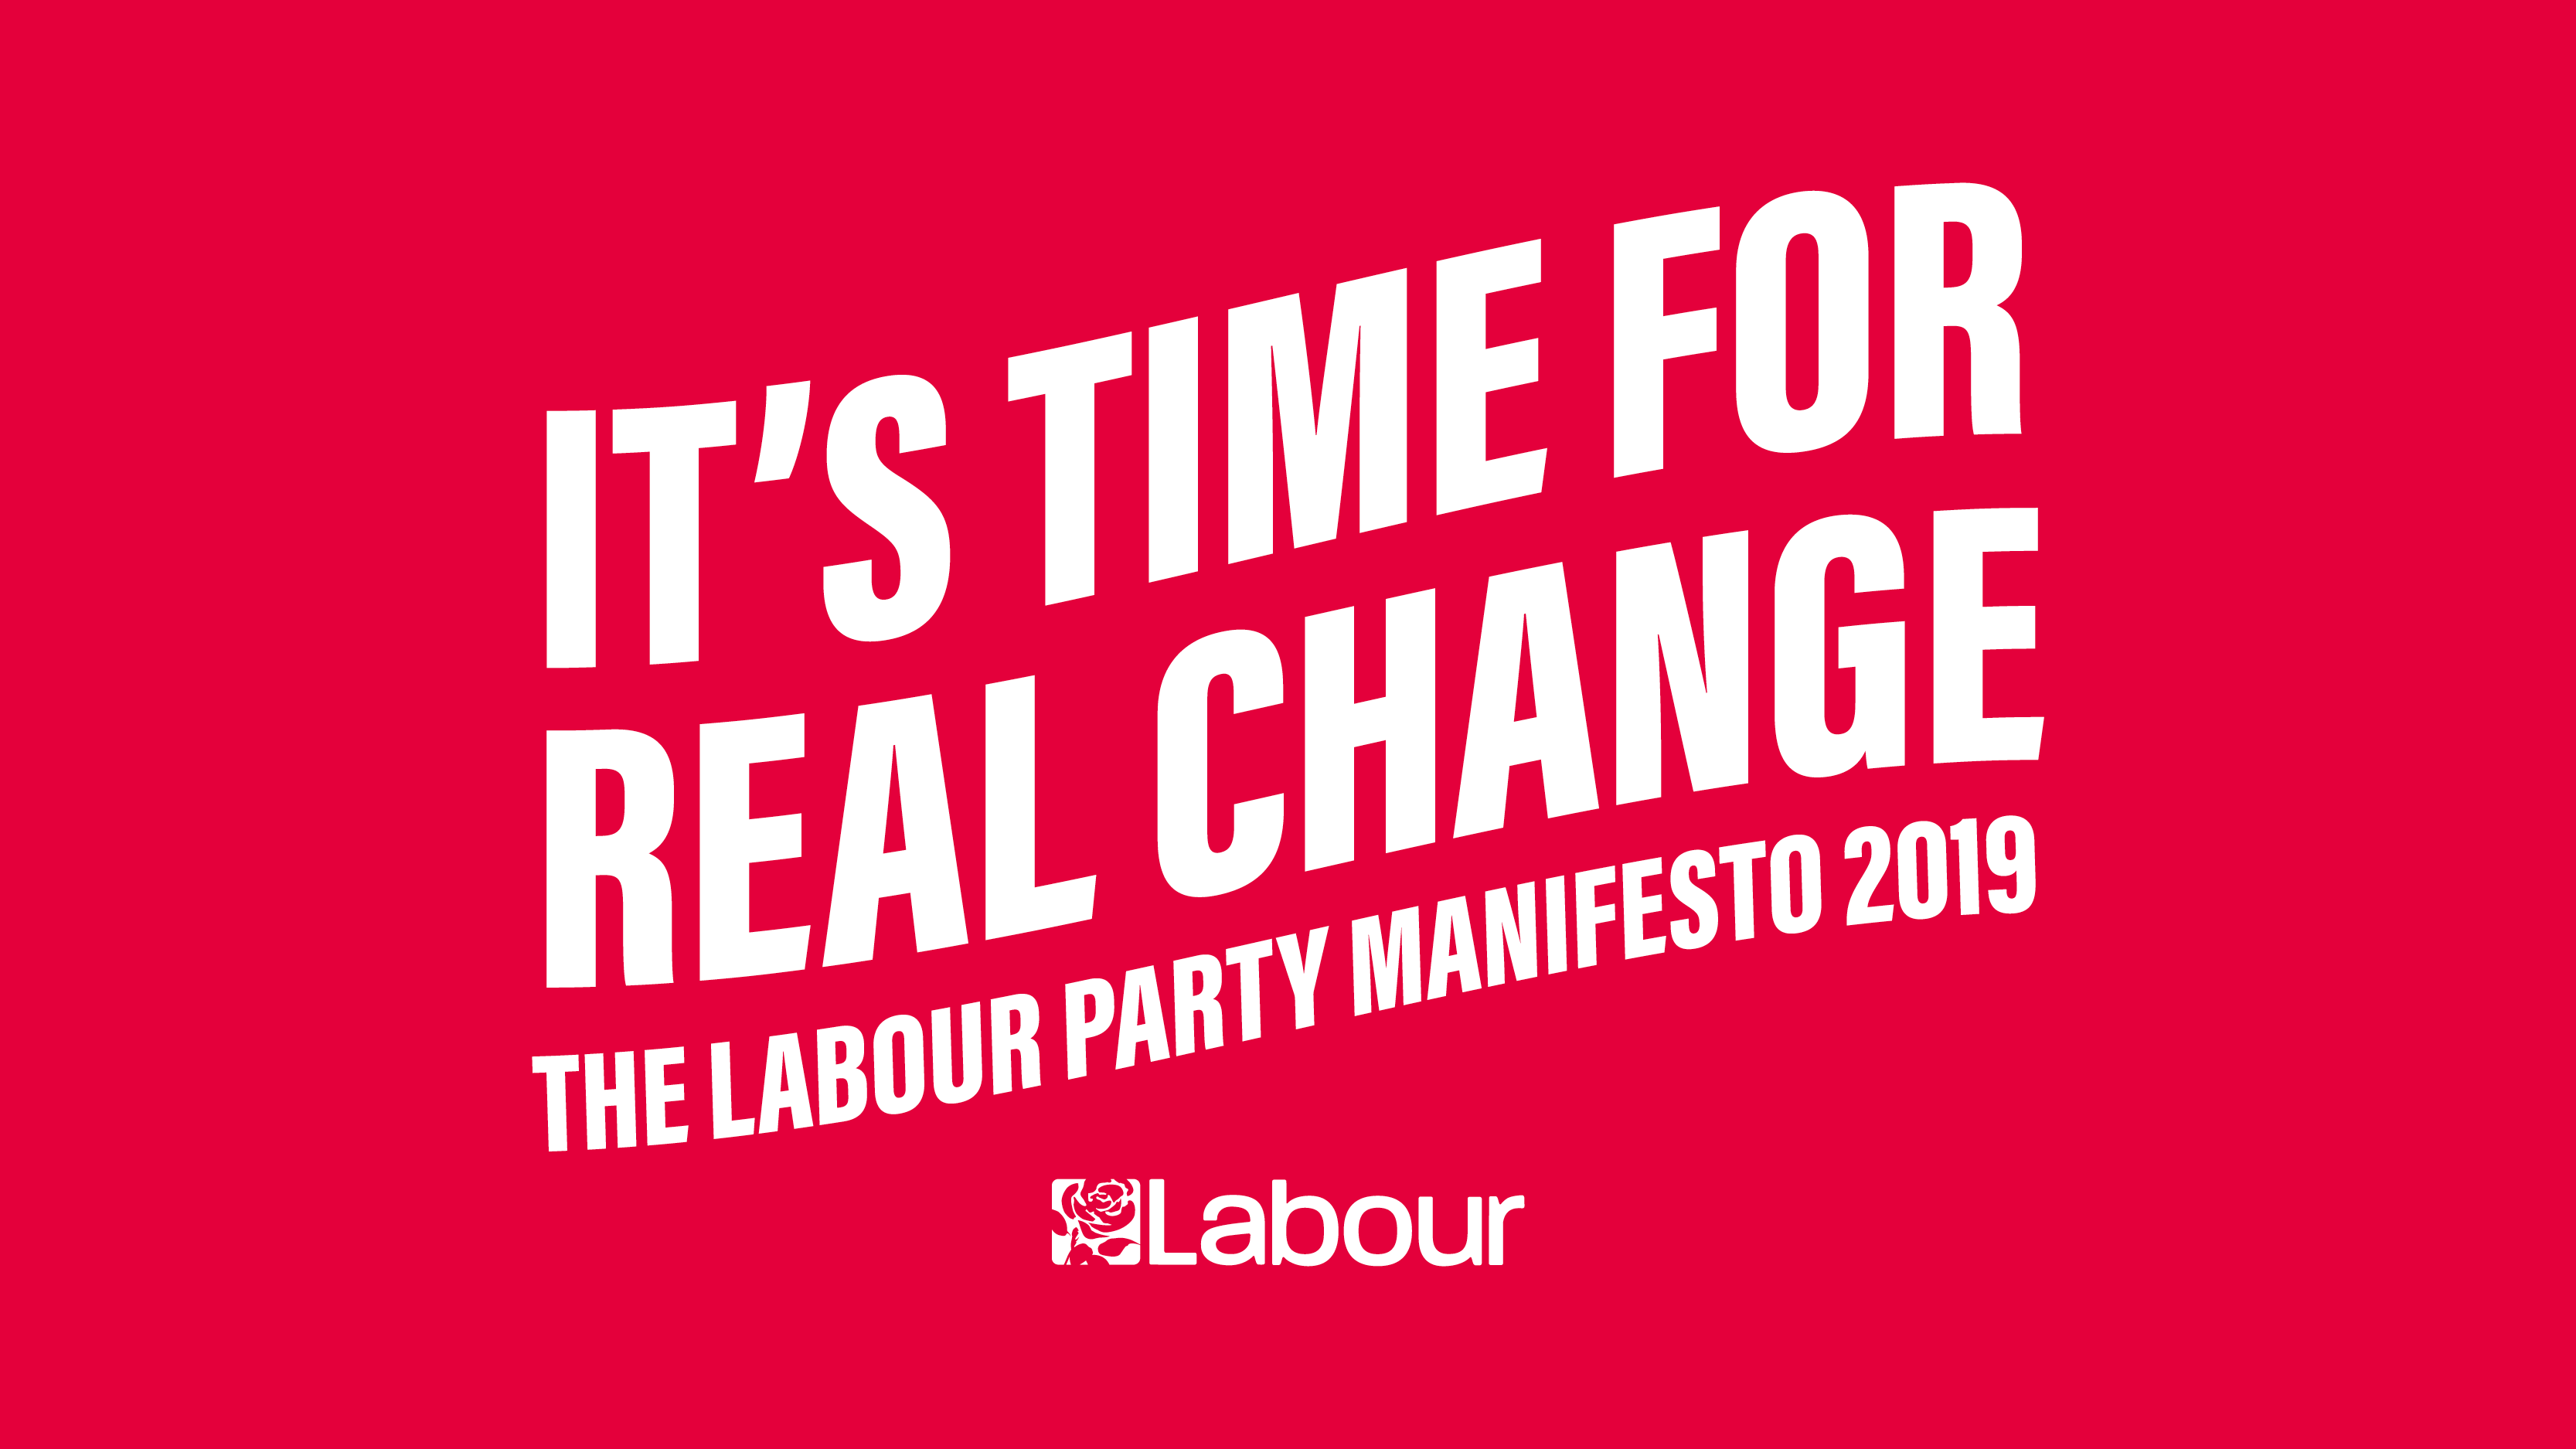 A logo with the words 'It's Time for Real Change' and the Labour logo